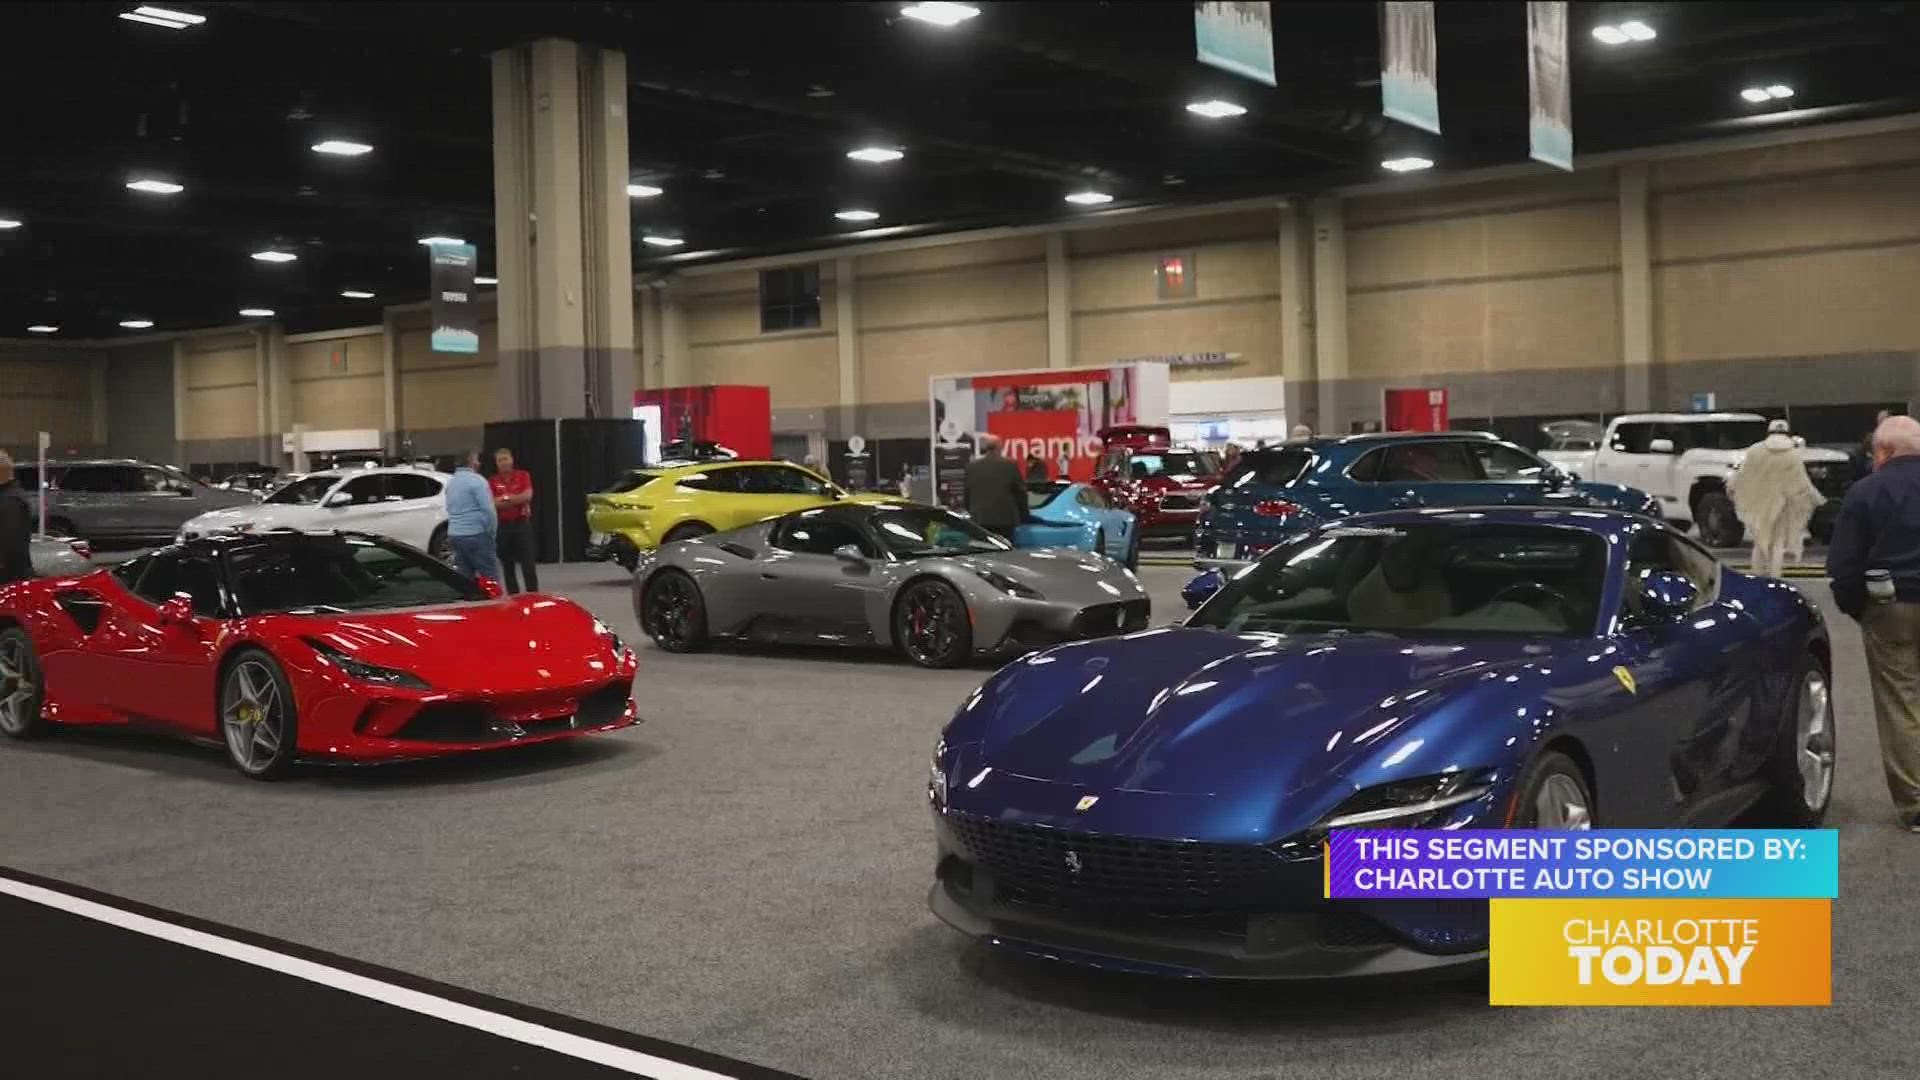 Get your tickets  to the spectacular auto show